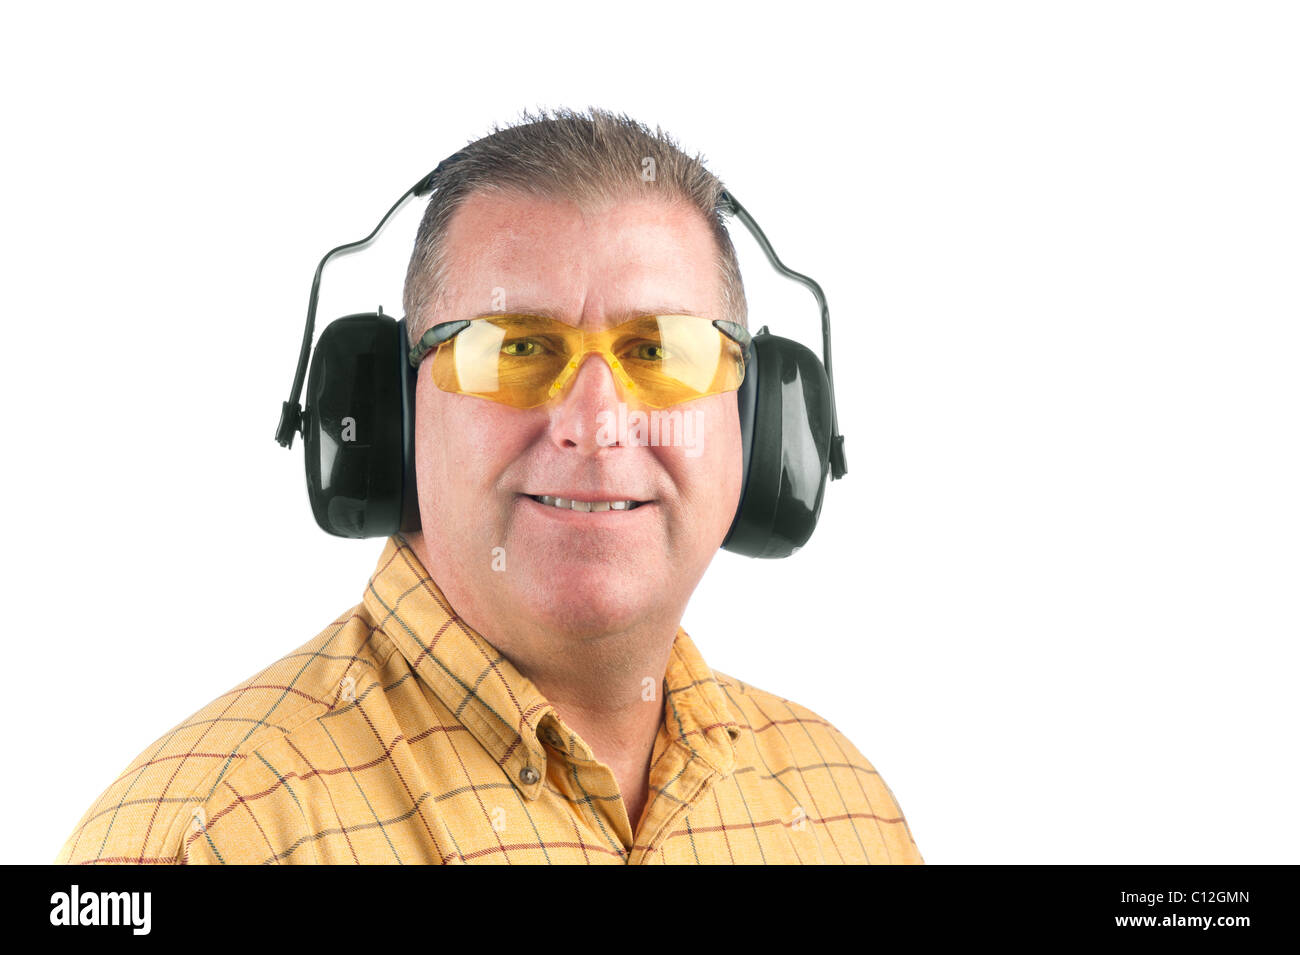 A worker wearing yellow safety glasses and hearing protection. Stock Photo